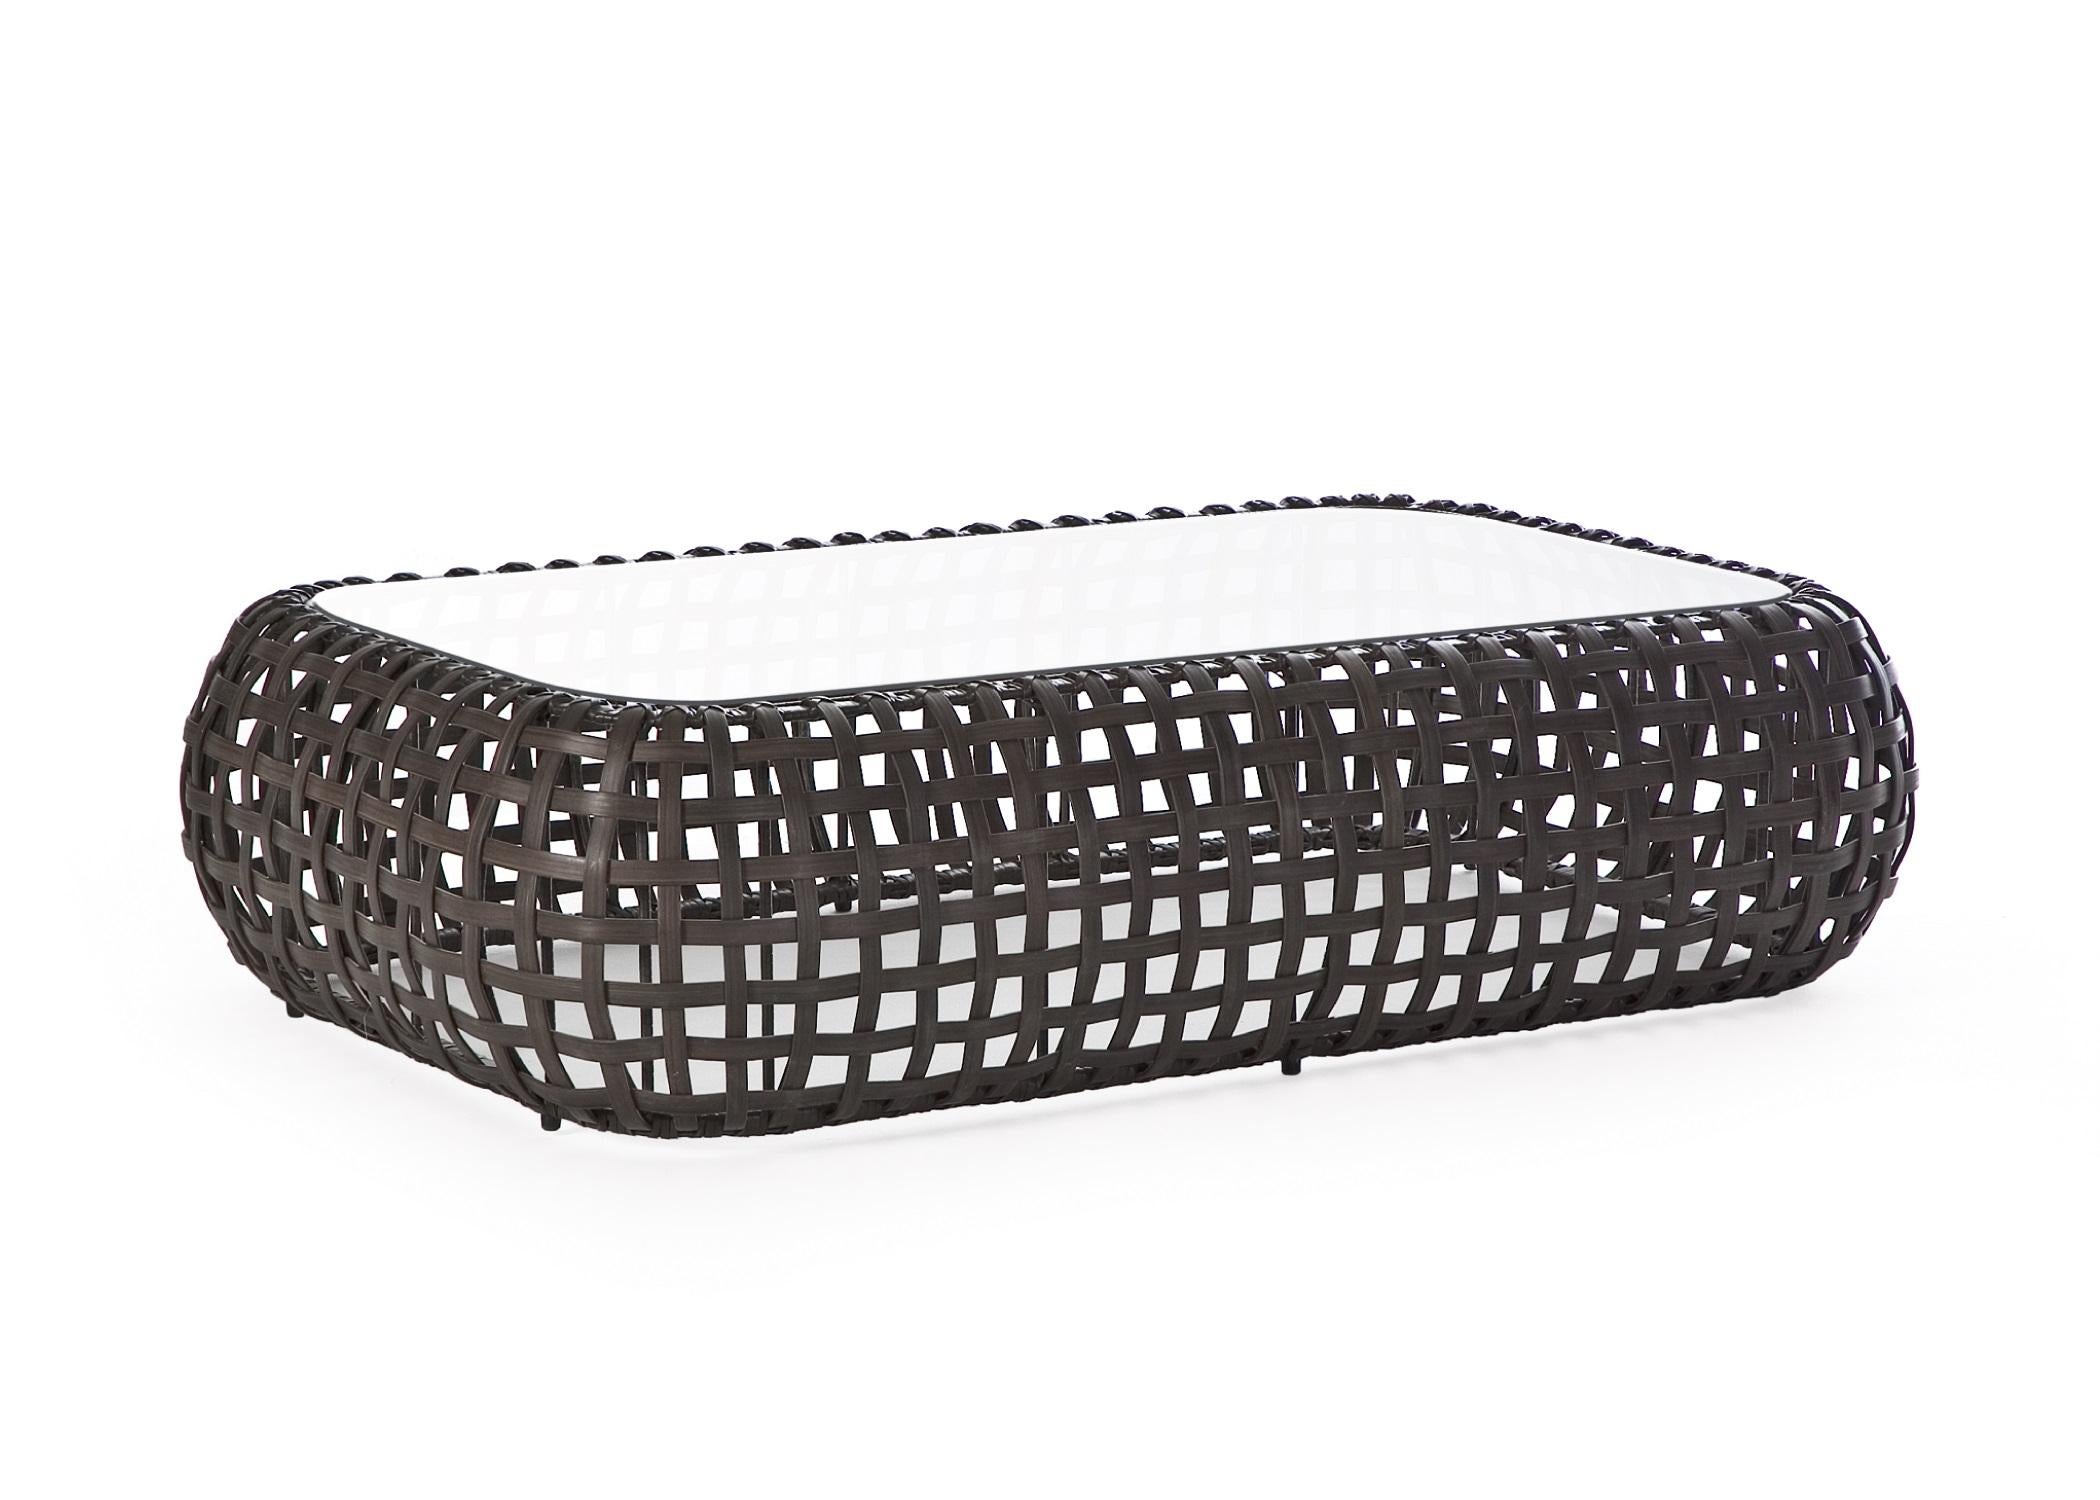 Outdoor matilda coffee table by Kenneth Cobonpue.
Materials: polyethelene. aluminum. glass. 
Also available in other colors and for indoors.
Dimensions:
glass 71 cm x 121 cm x H 10 mm.
 table 92 cm x 142 cm x H 35 cm.

The same principle of a